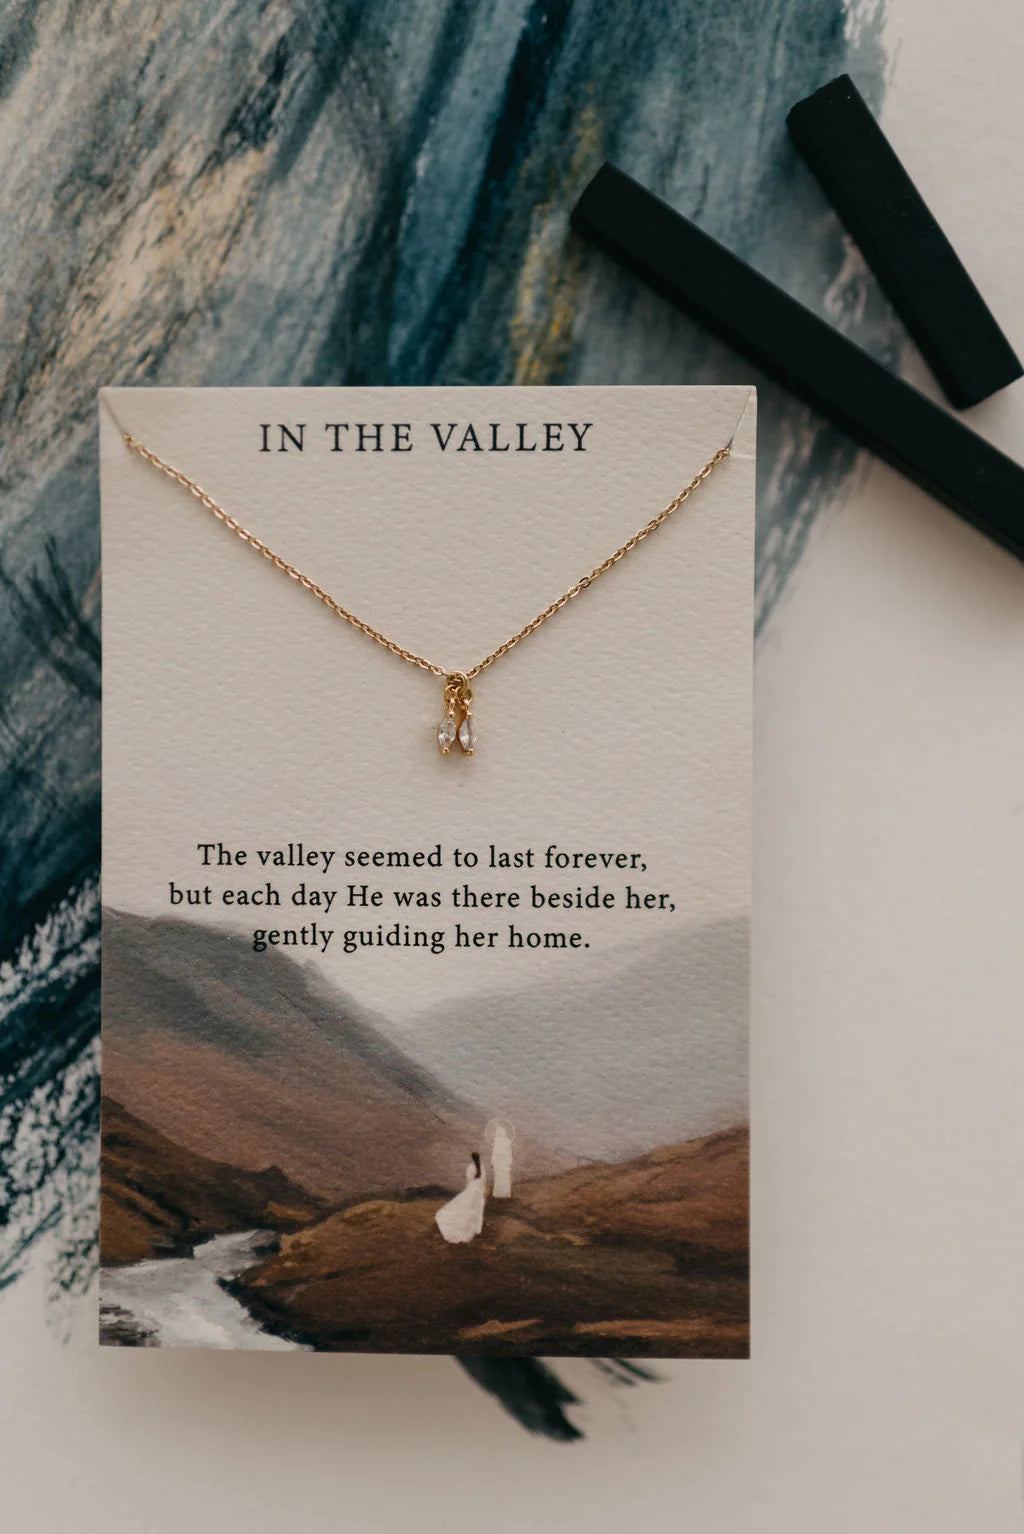 In the Valley Necklace | Dear Heart Jewelry | Christian Jewelry | Christian Necklace